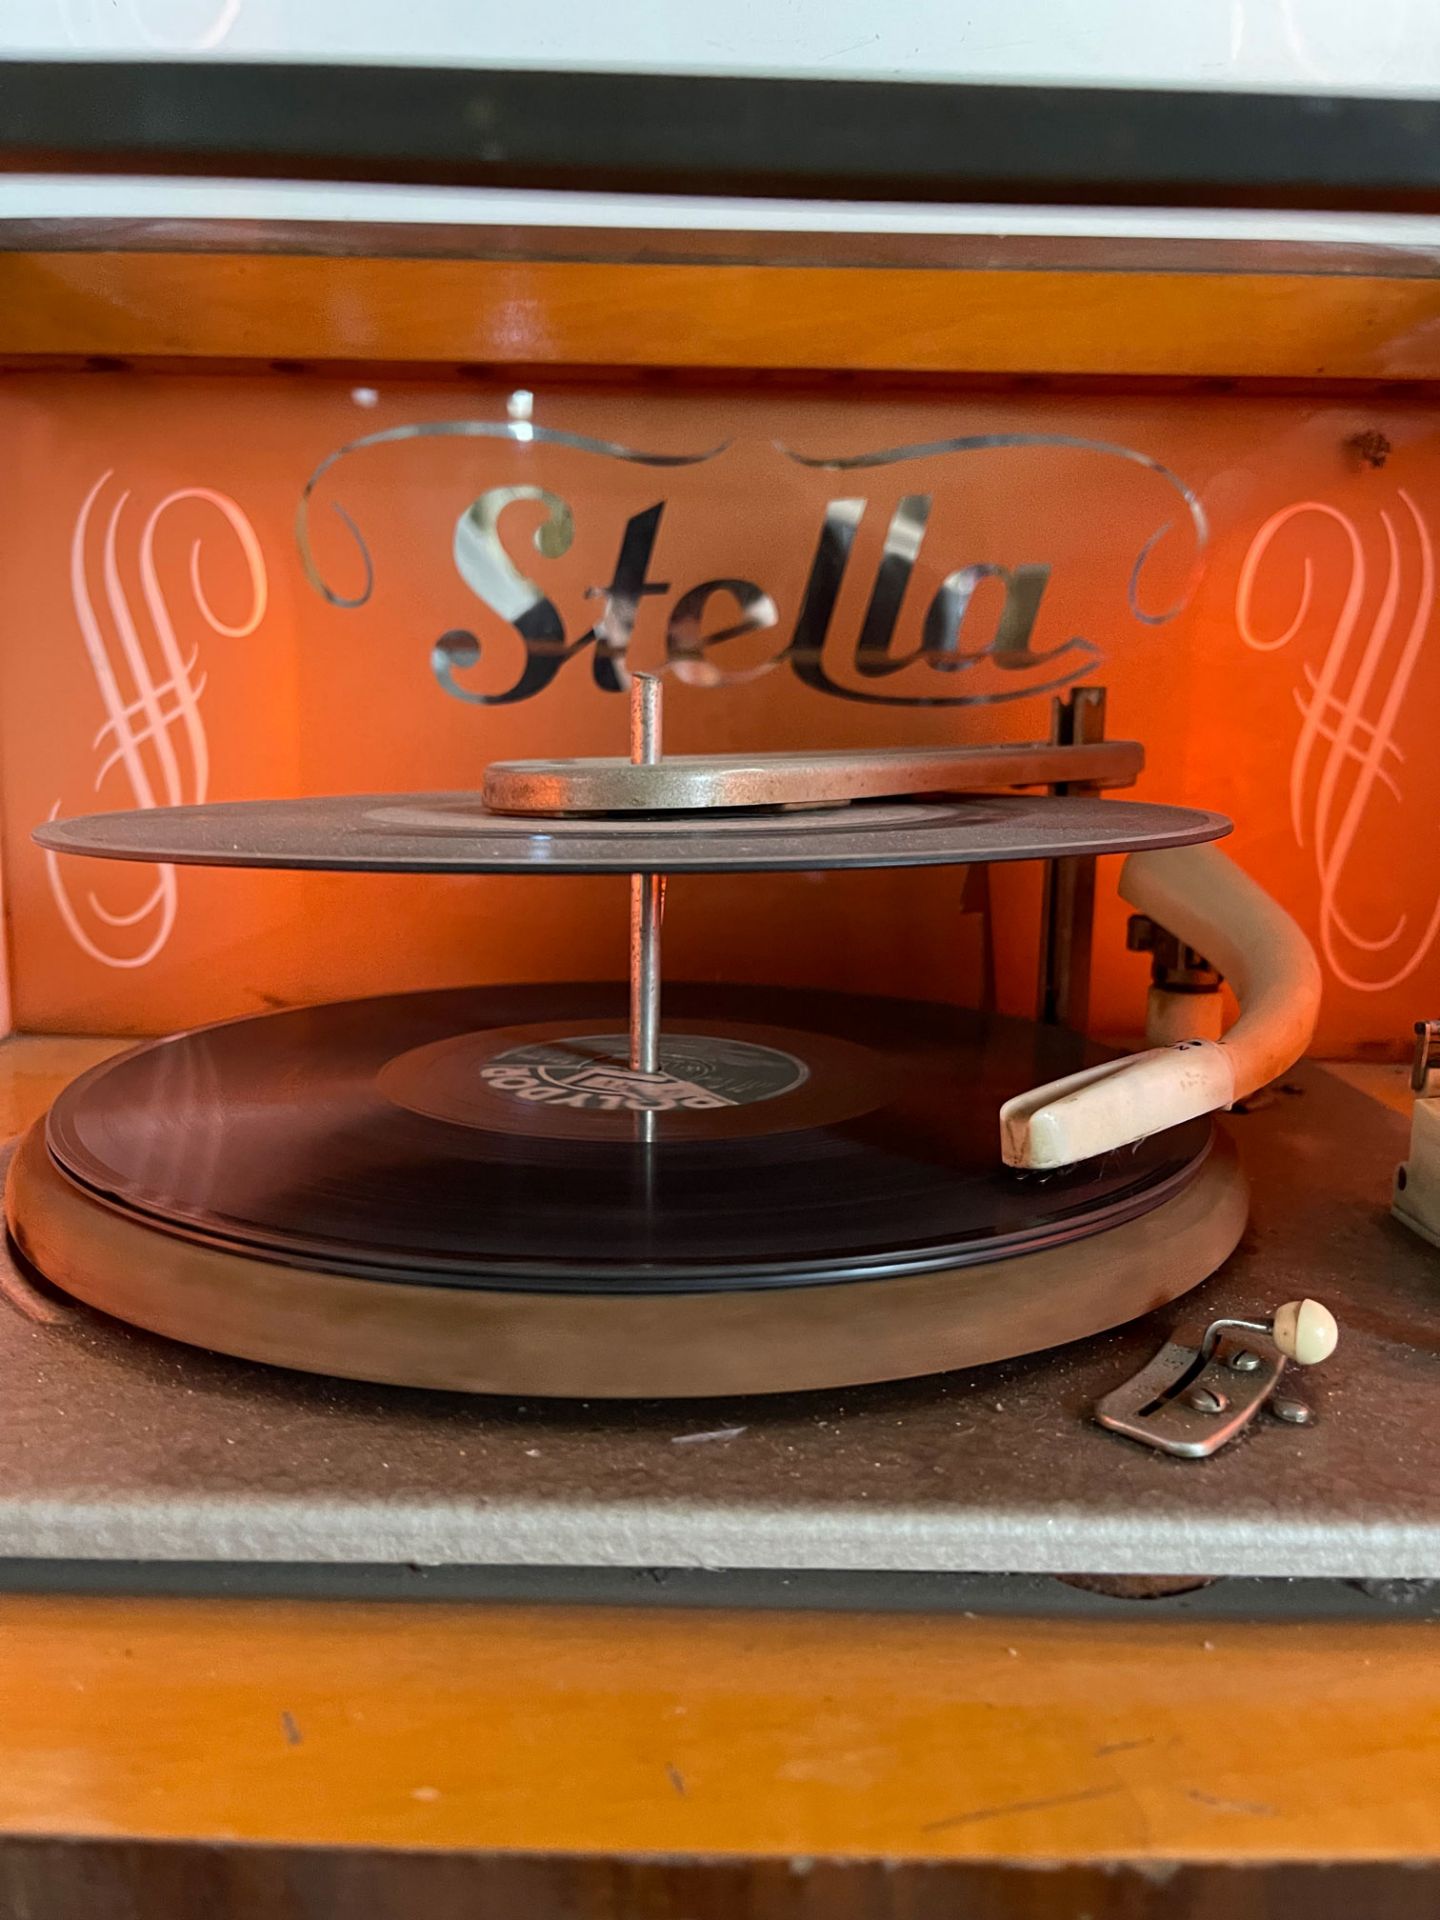 1954 Belgian Stella 531 Coin-Op Record Player with Built-In Radio - Image 11 of 15